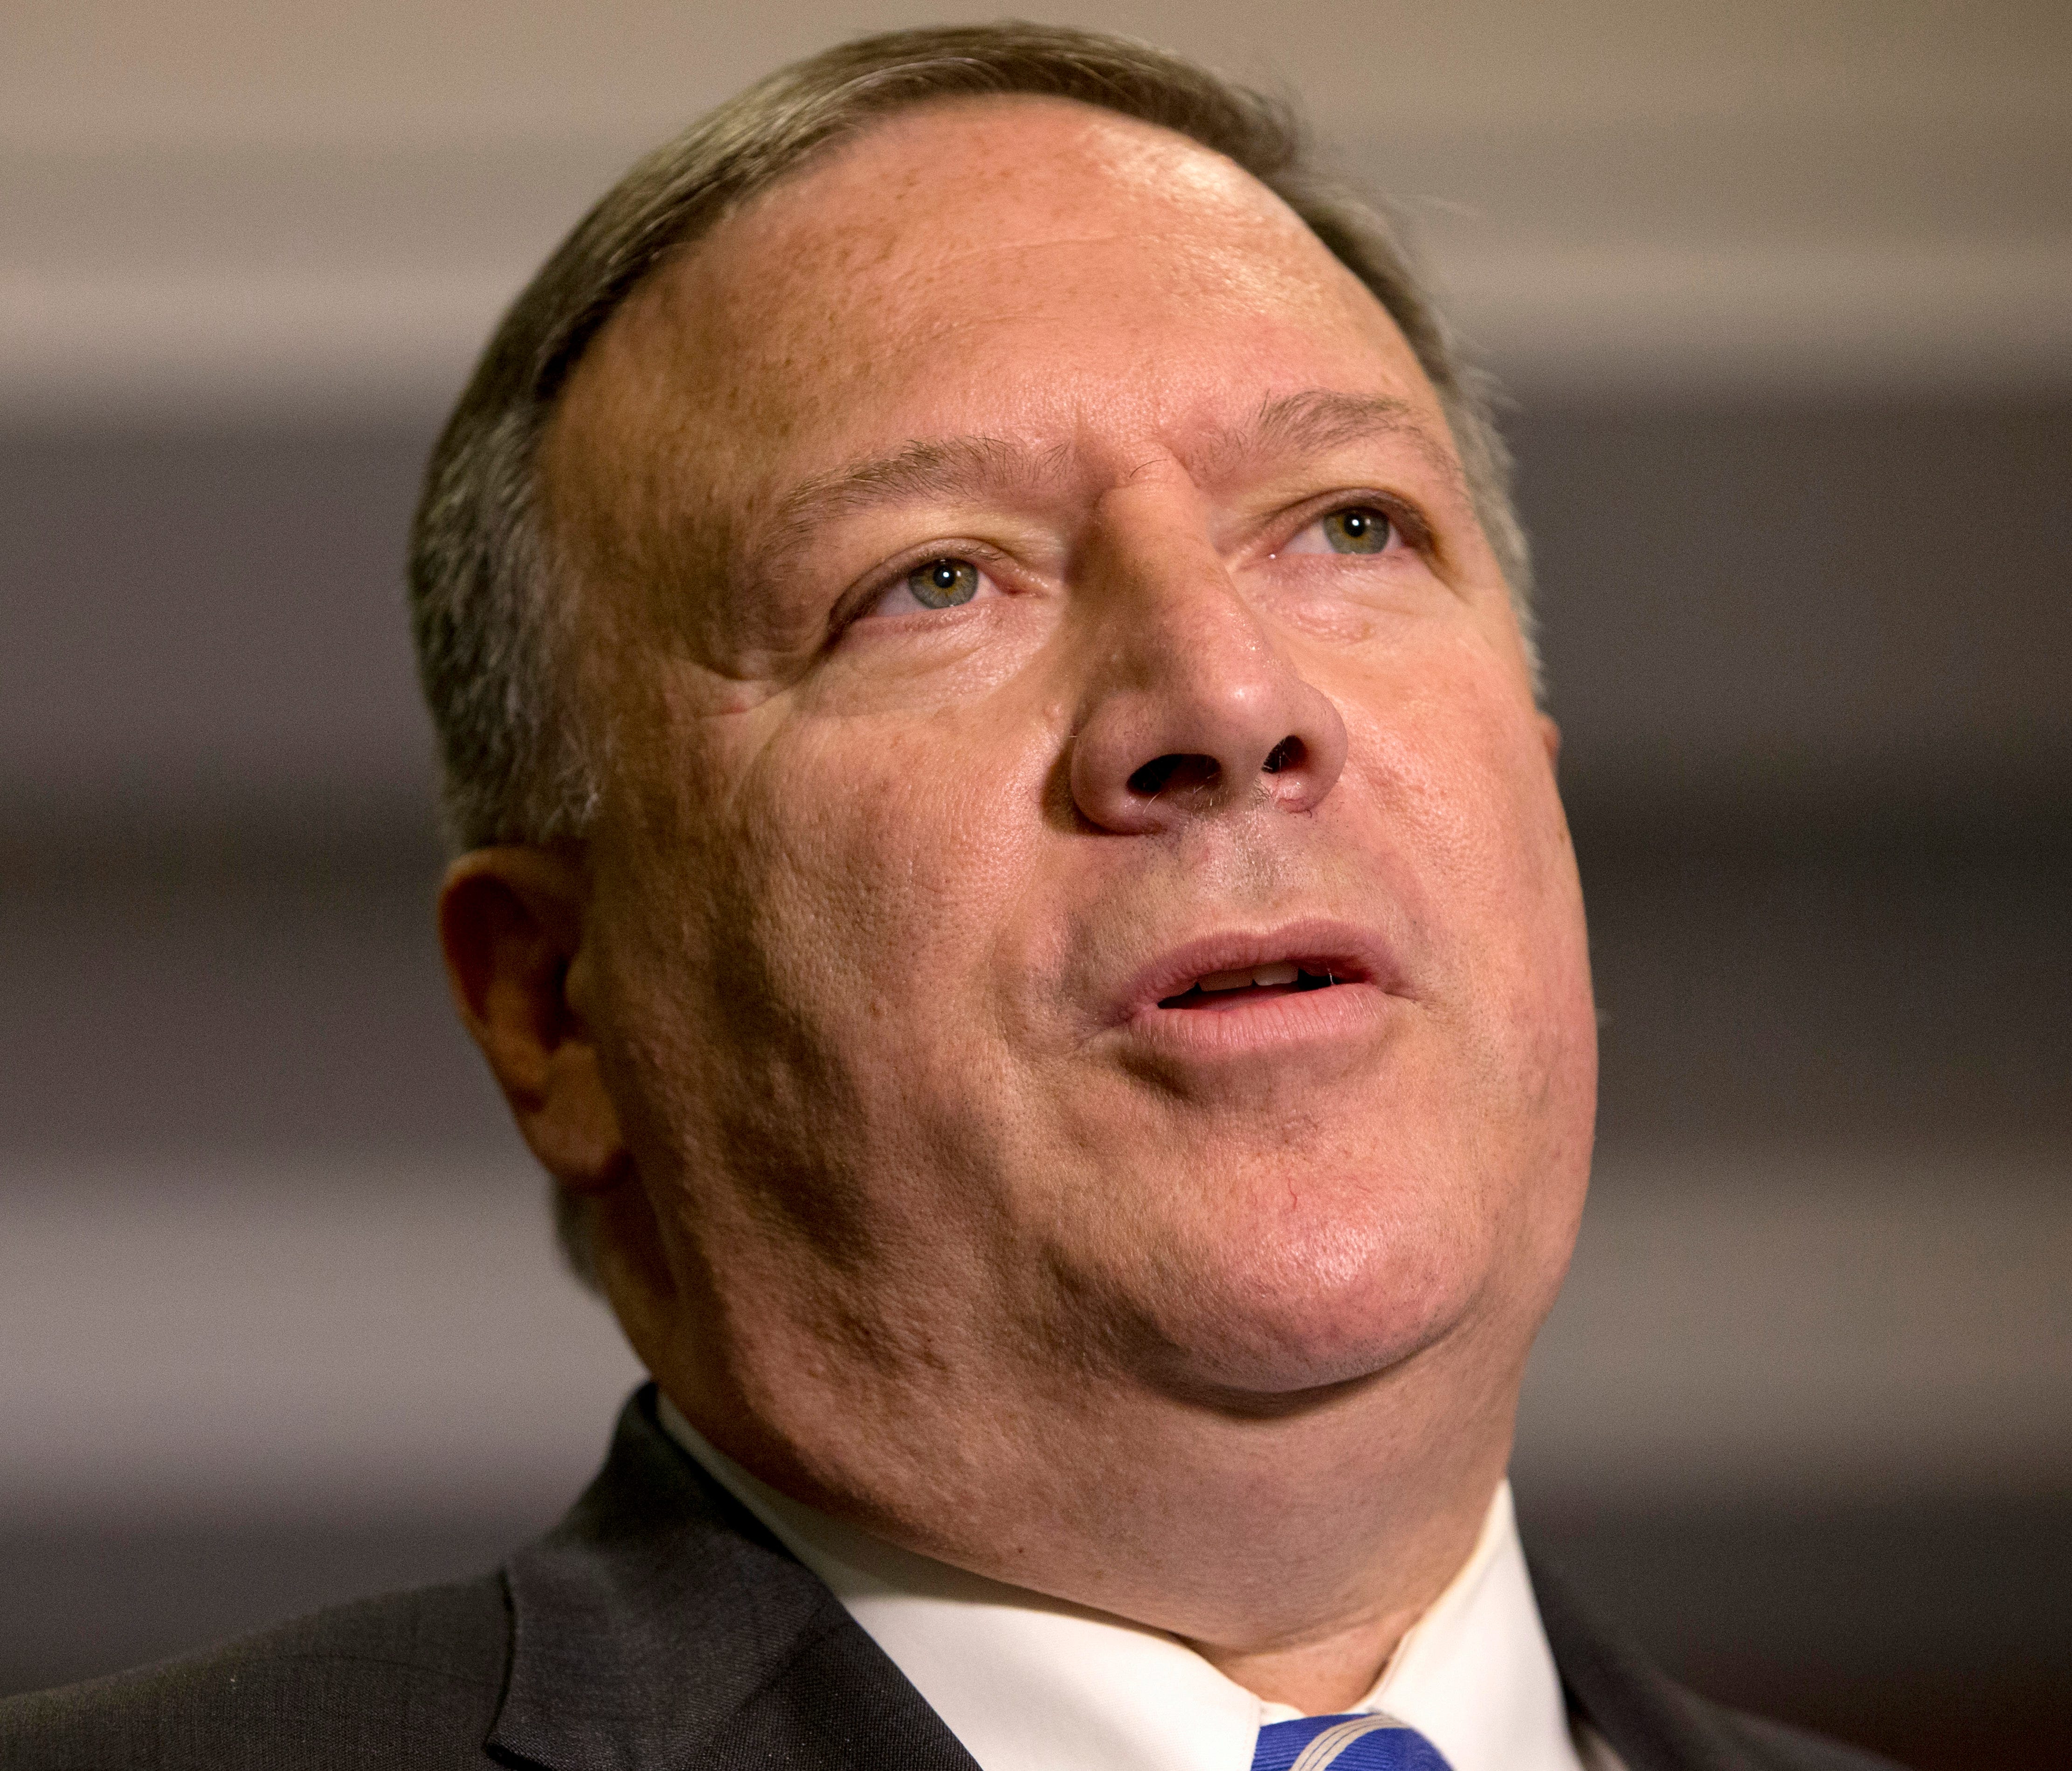 Rep. Mike Pompeo, R-Kan., has been nominated for CIA director.